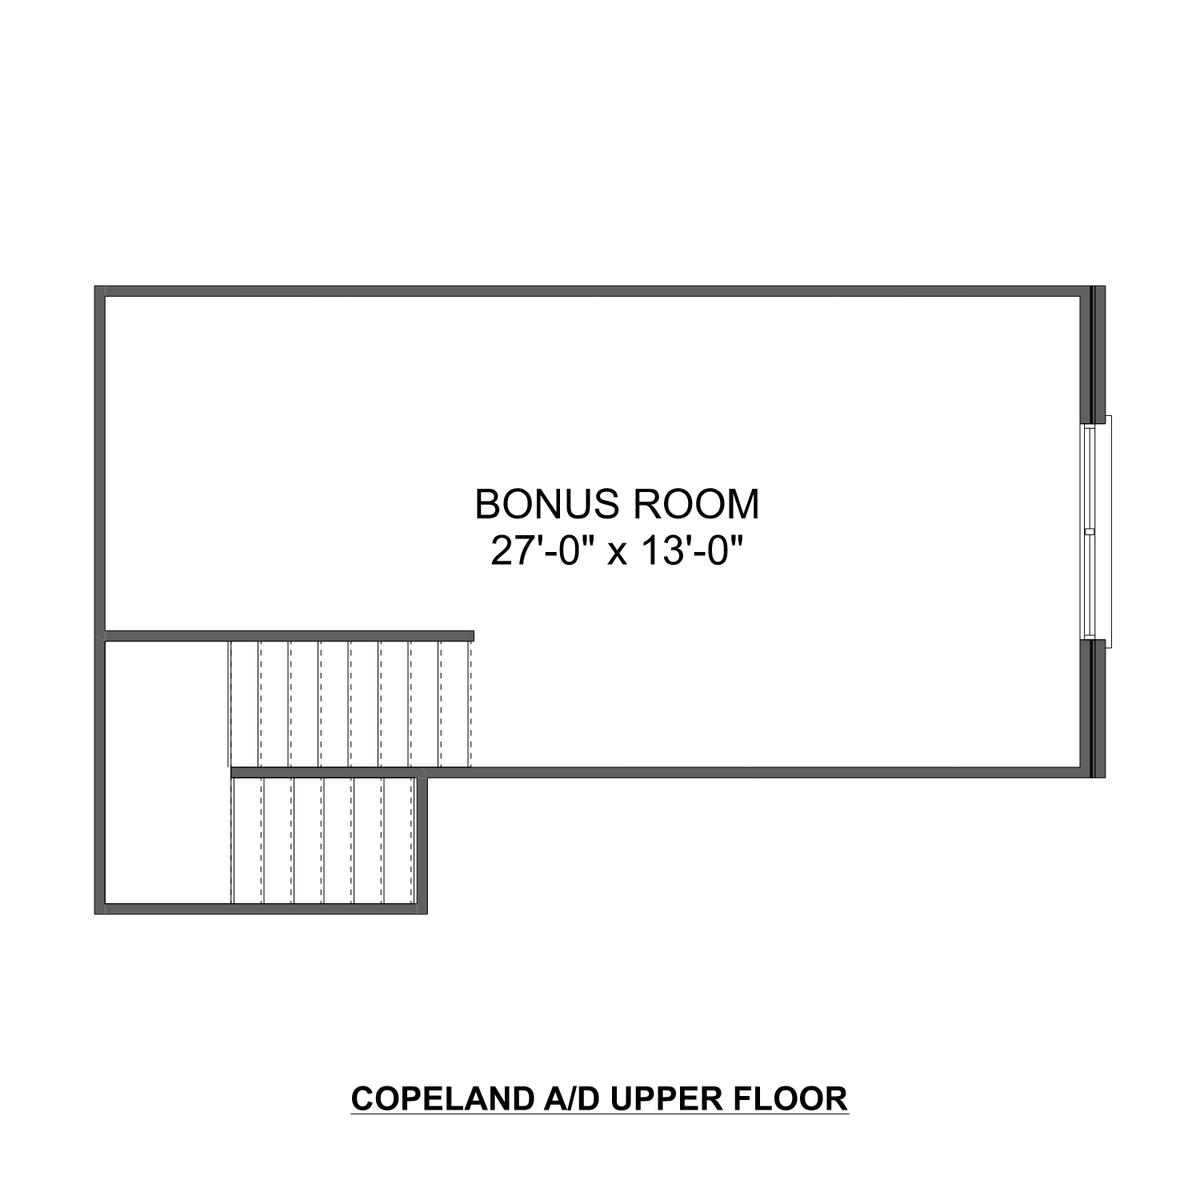 2 - The Copeland D floor plan layout for 110 Atkinson Alley in Davidson Homes' Barnett's Crossing community.